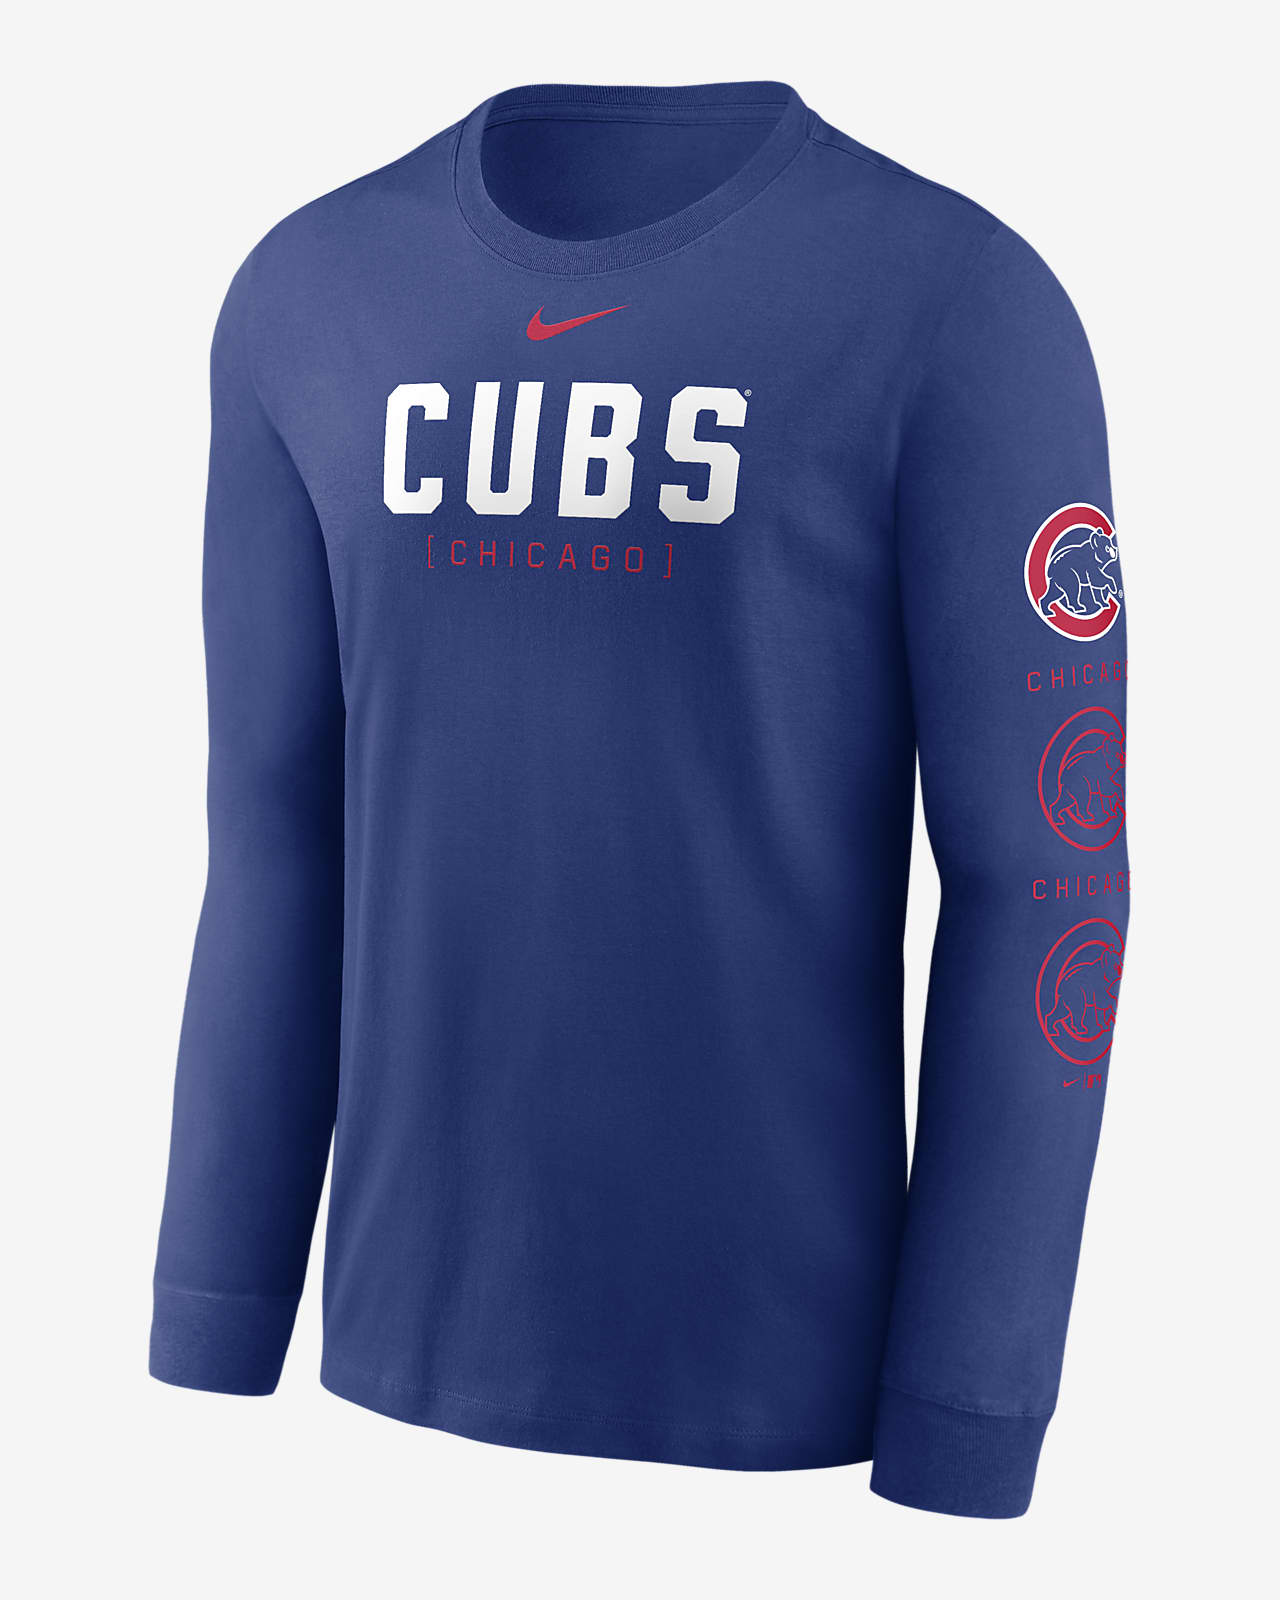 Chicago Cubs Repeater Men's Nike MLB Long-Sleeve T-Shirt